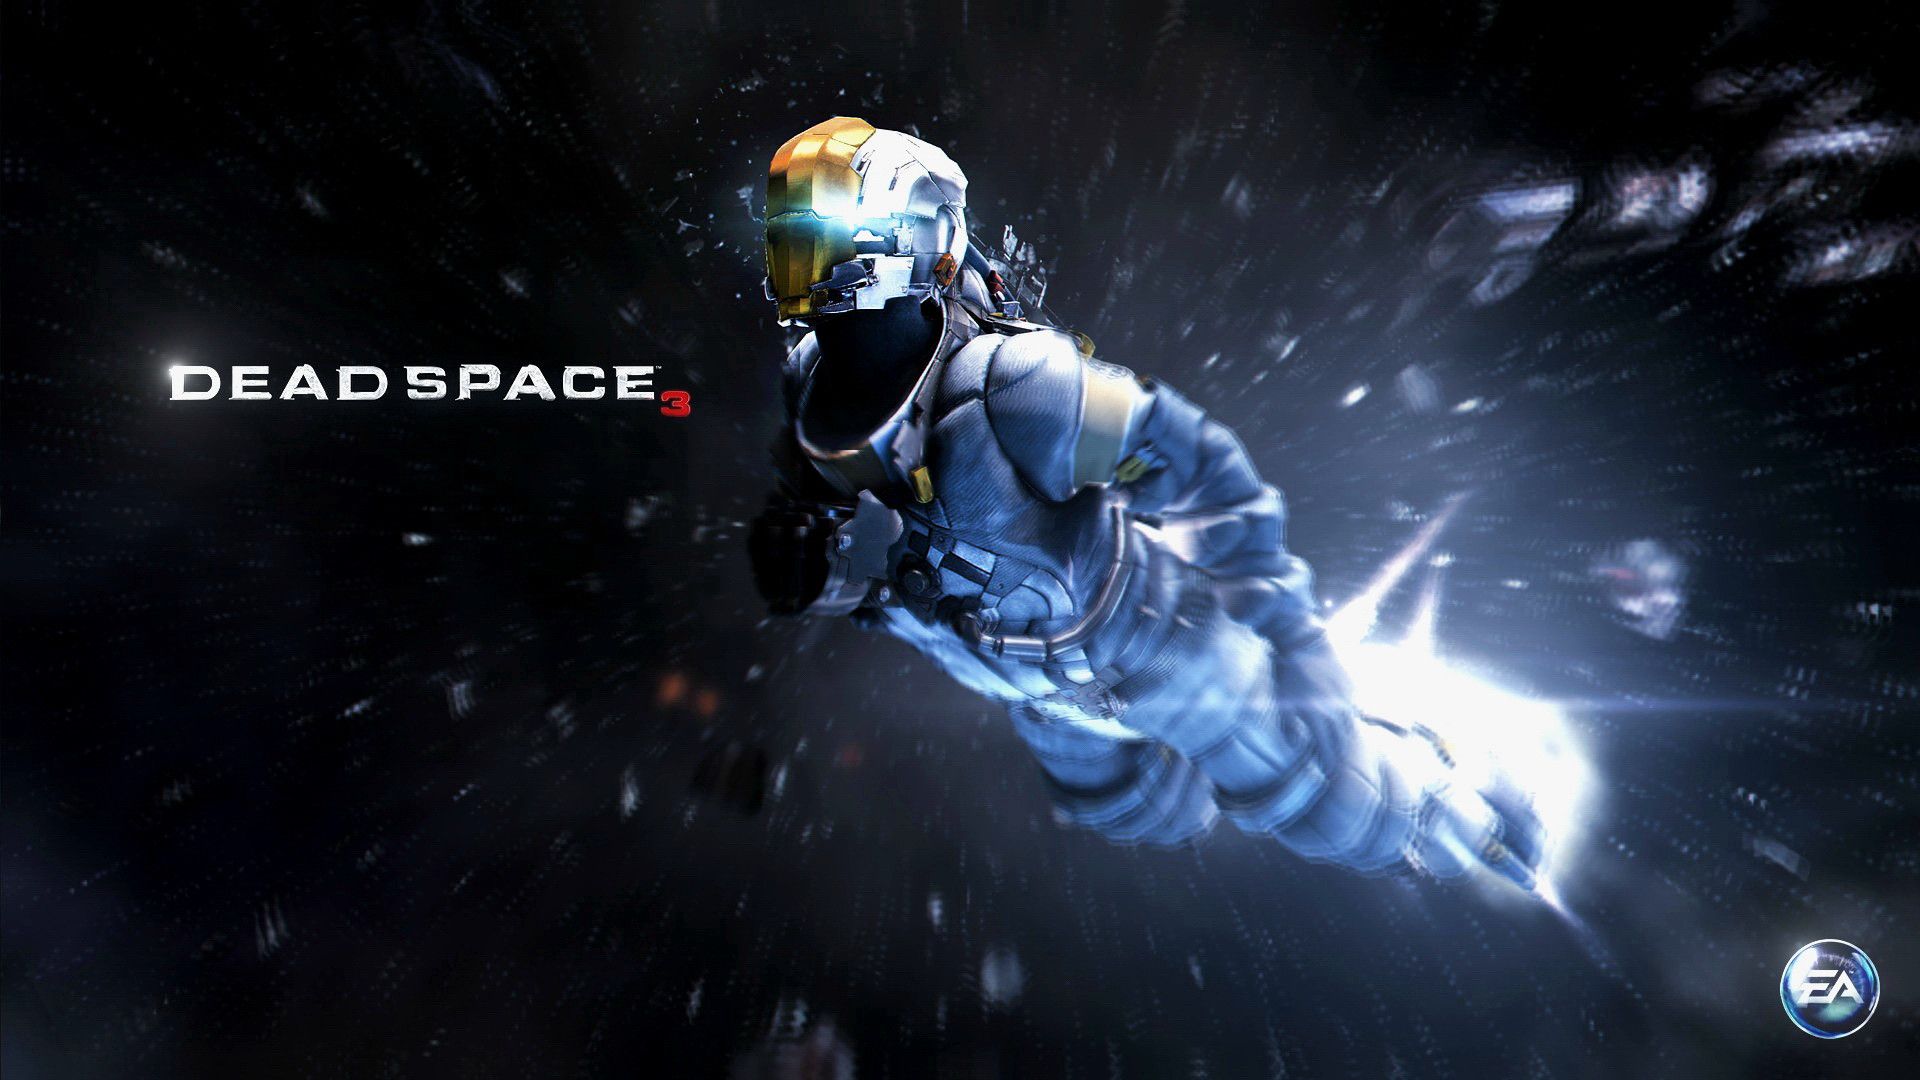 Dead Space 3 Wallpapers High Resolution 3L8A8V1   4USkY